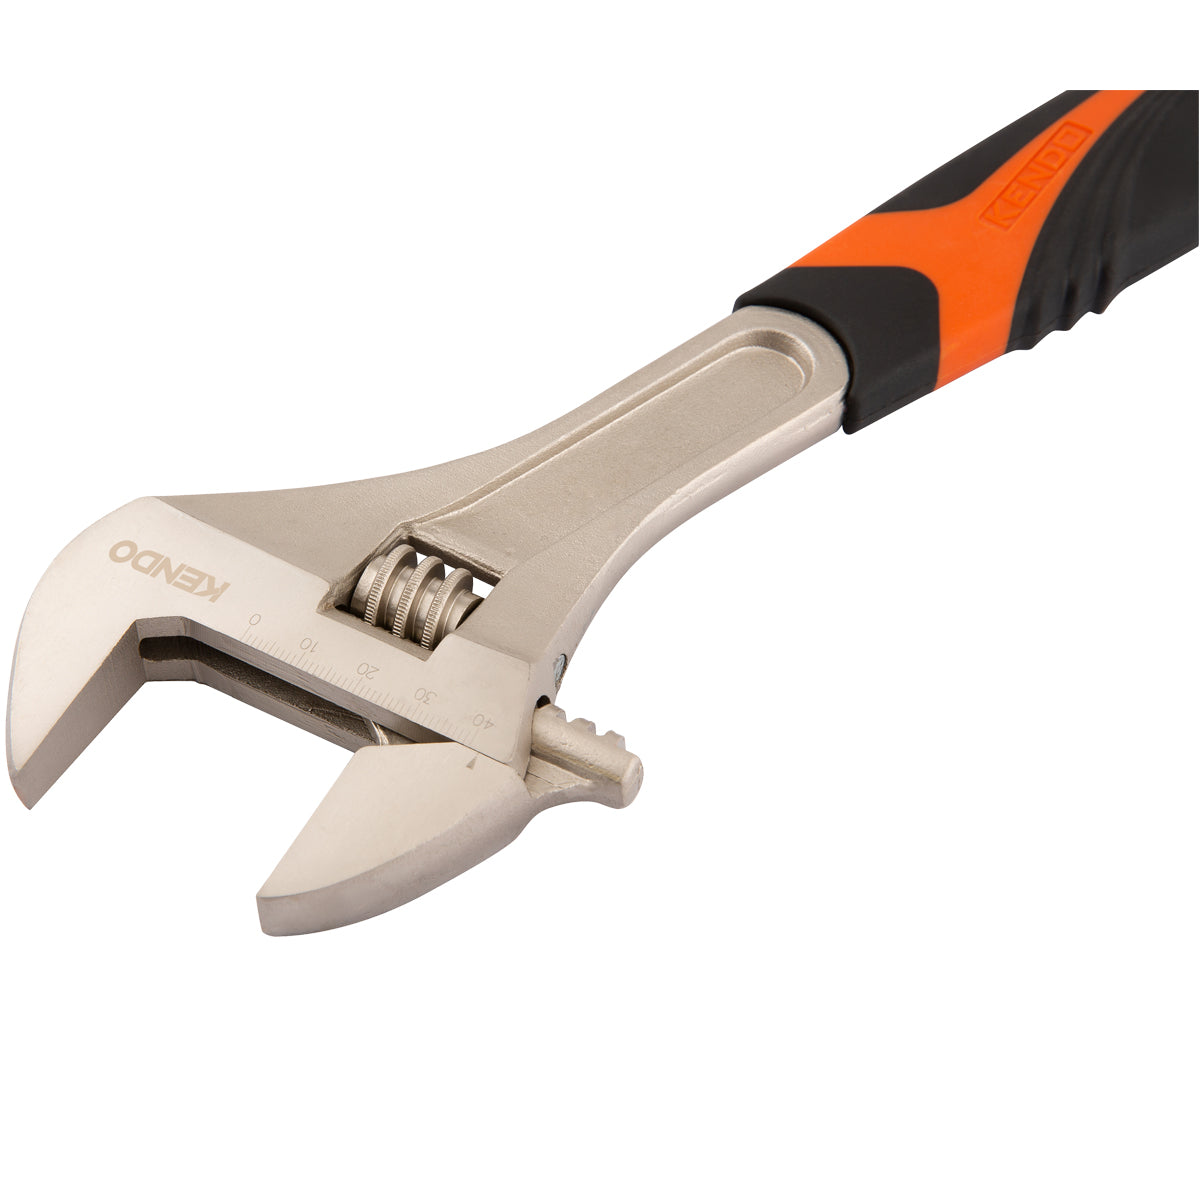 Kendo 300mm Extra-Wide Opening Adjustable Wrench